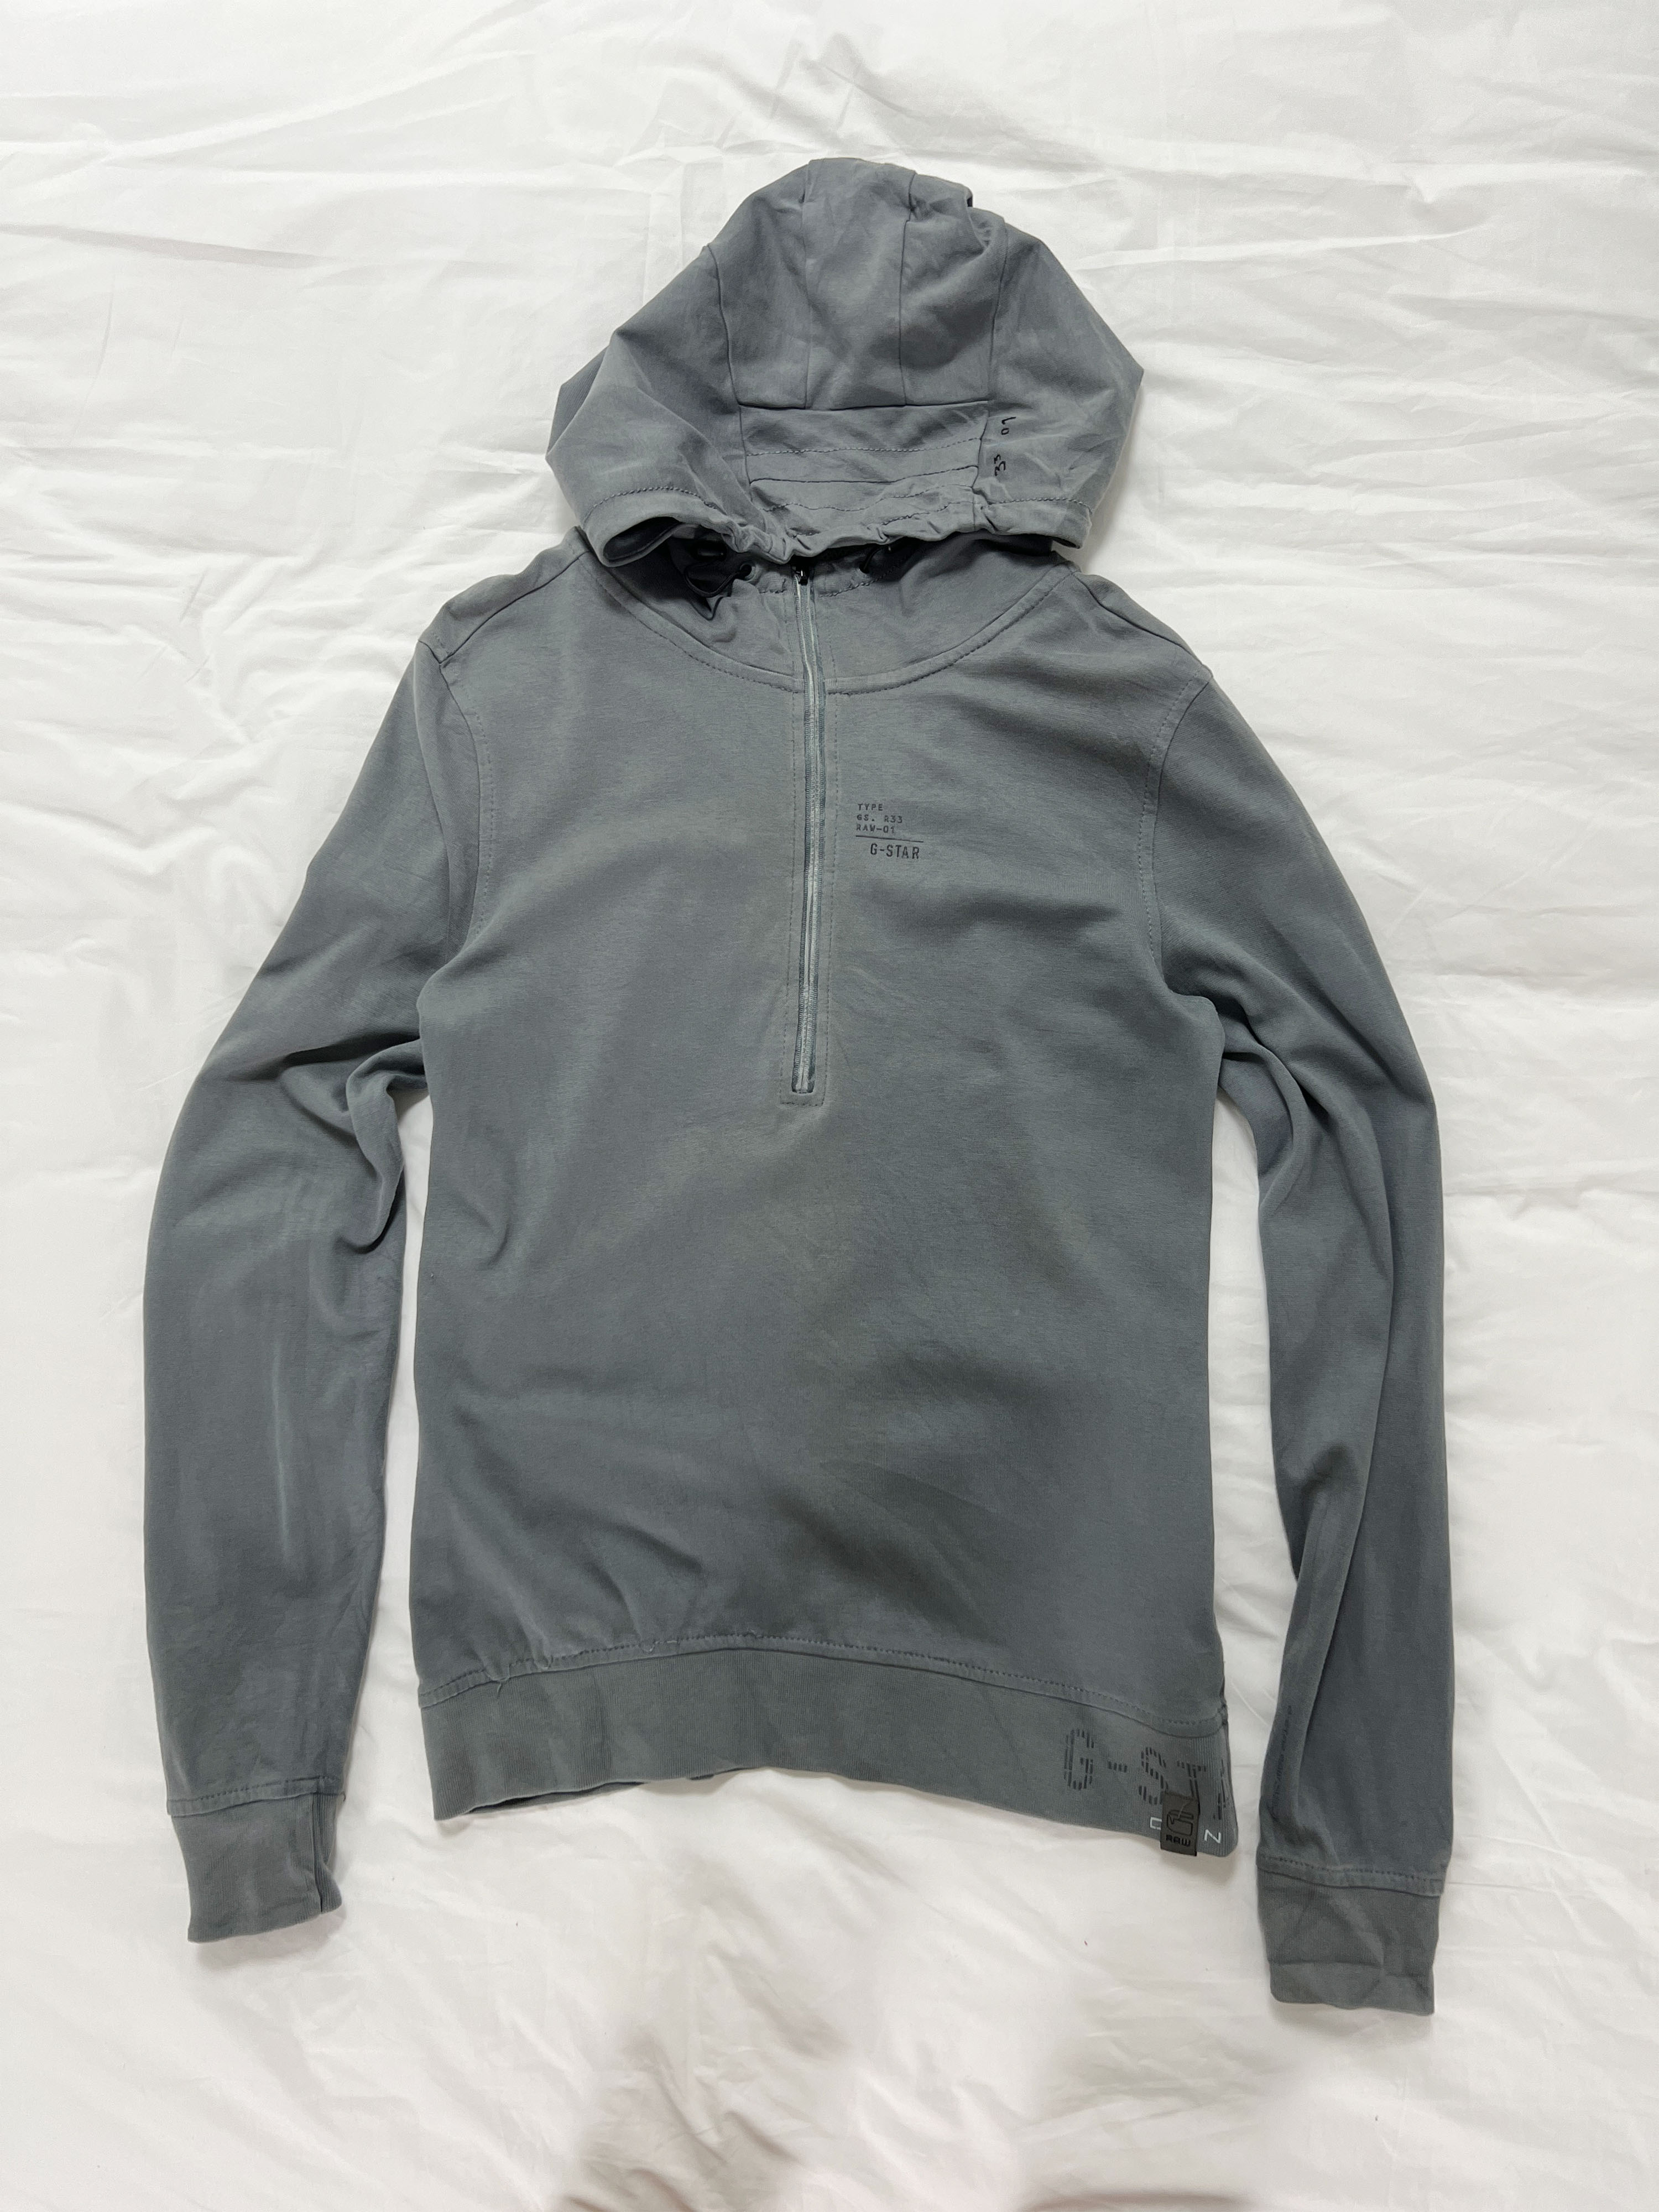 G STAR RAW pullover hoodie